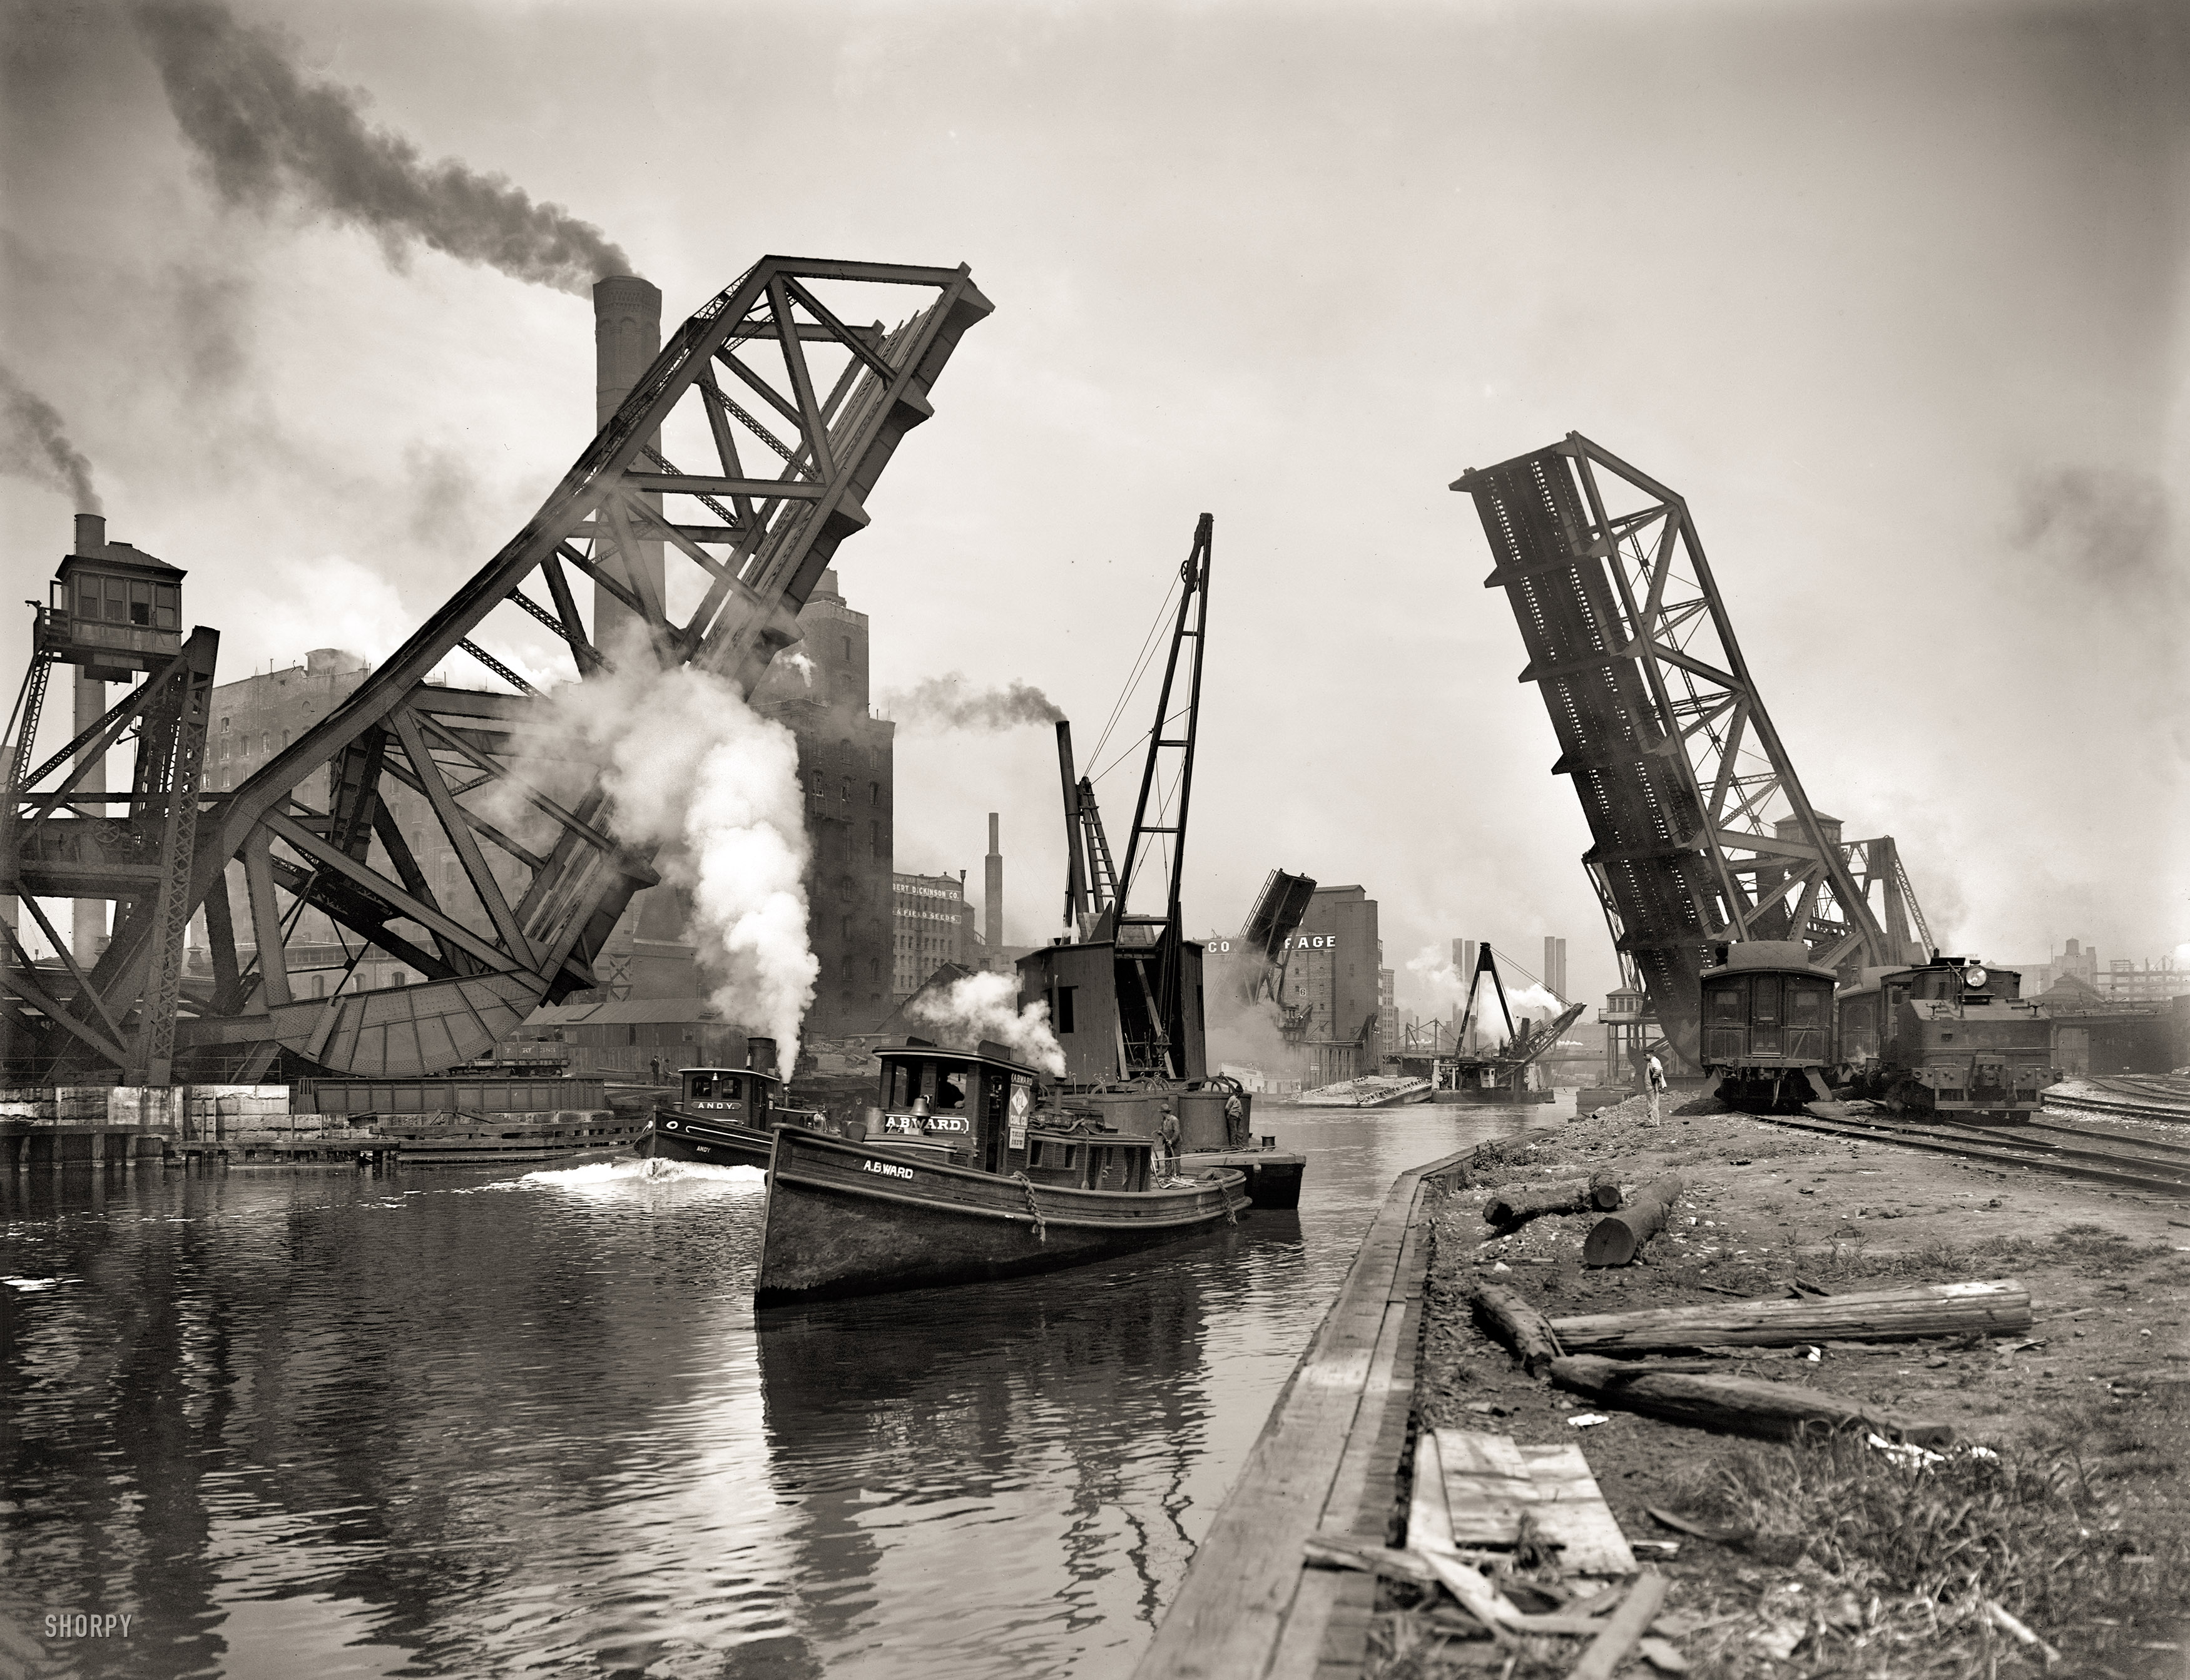 Chicago circa 1900. "12th Street bascule bridge." Andy about to overtake A.B. Ward on the Chicago River. 8x10 inch dry plate glass negative. View full size.